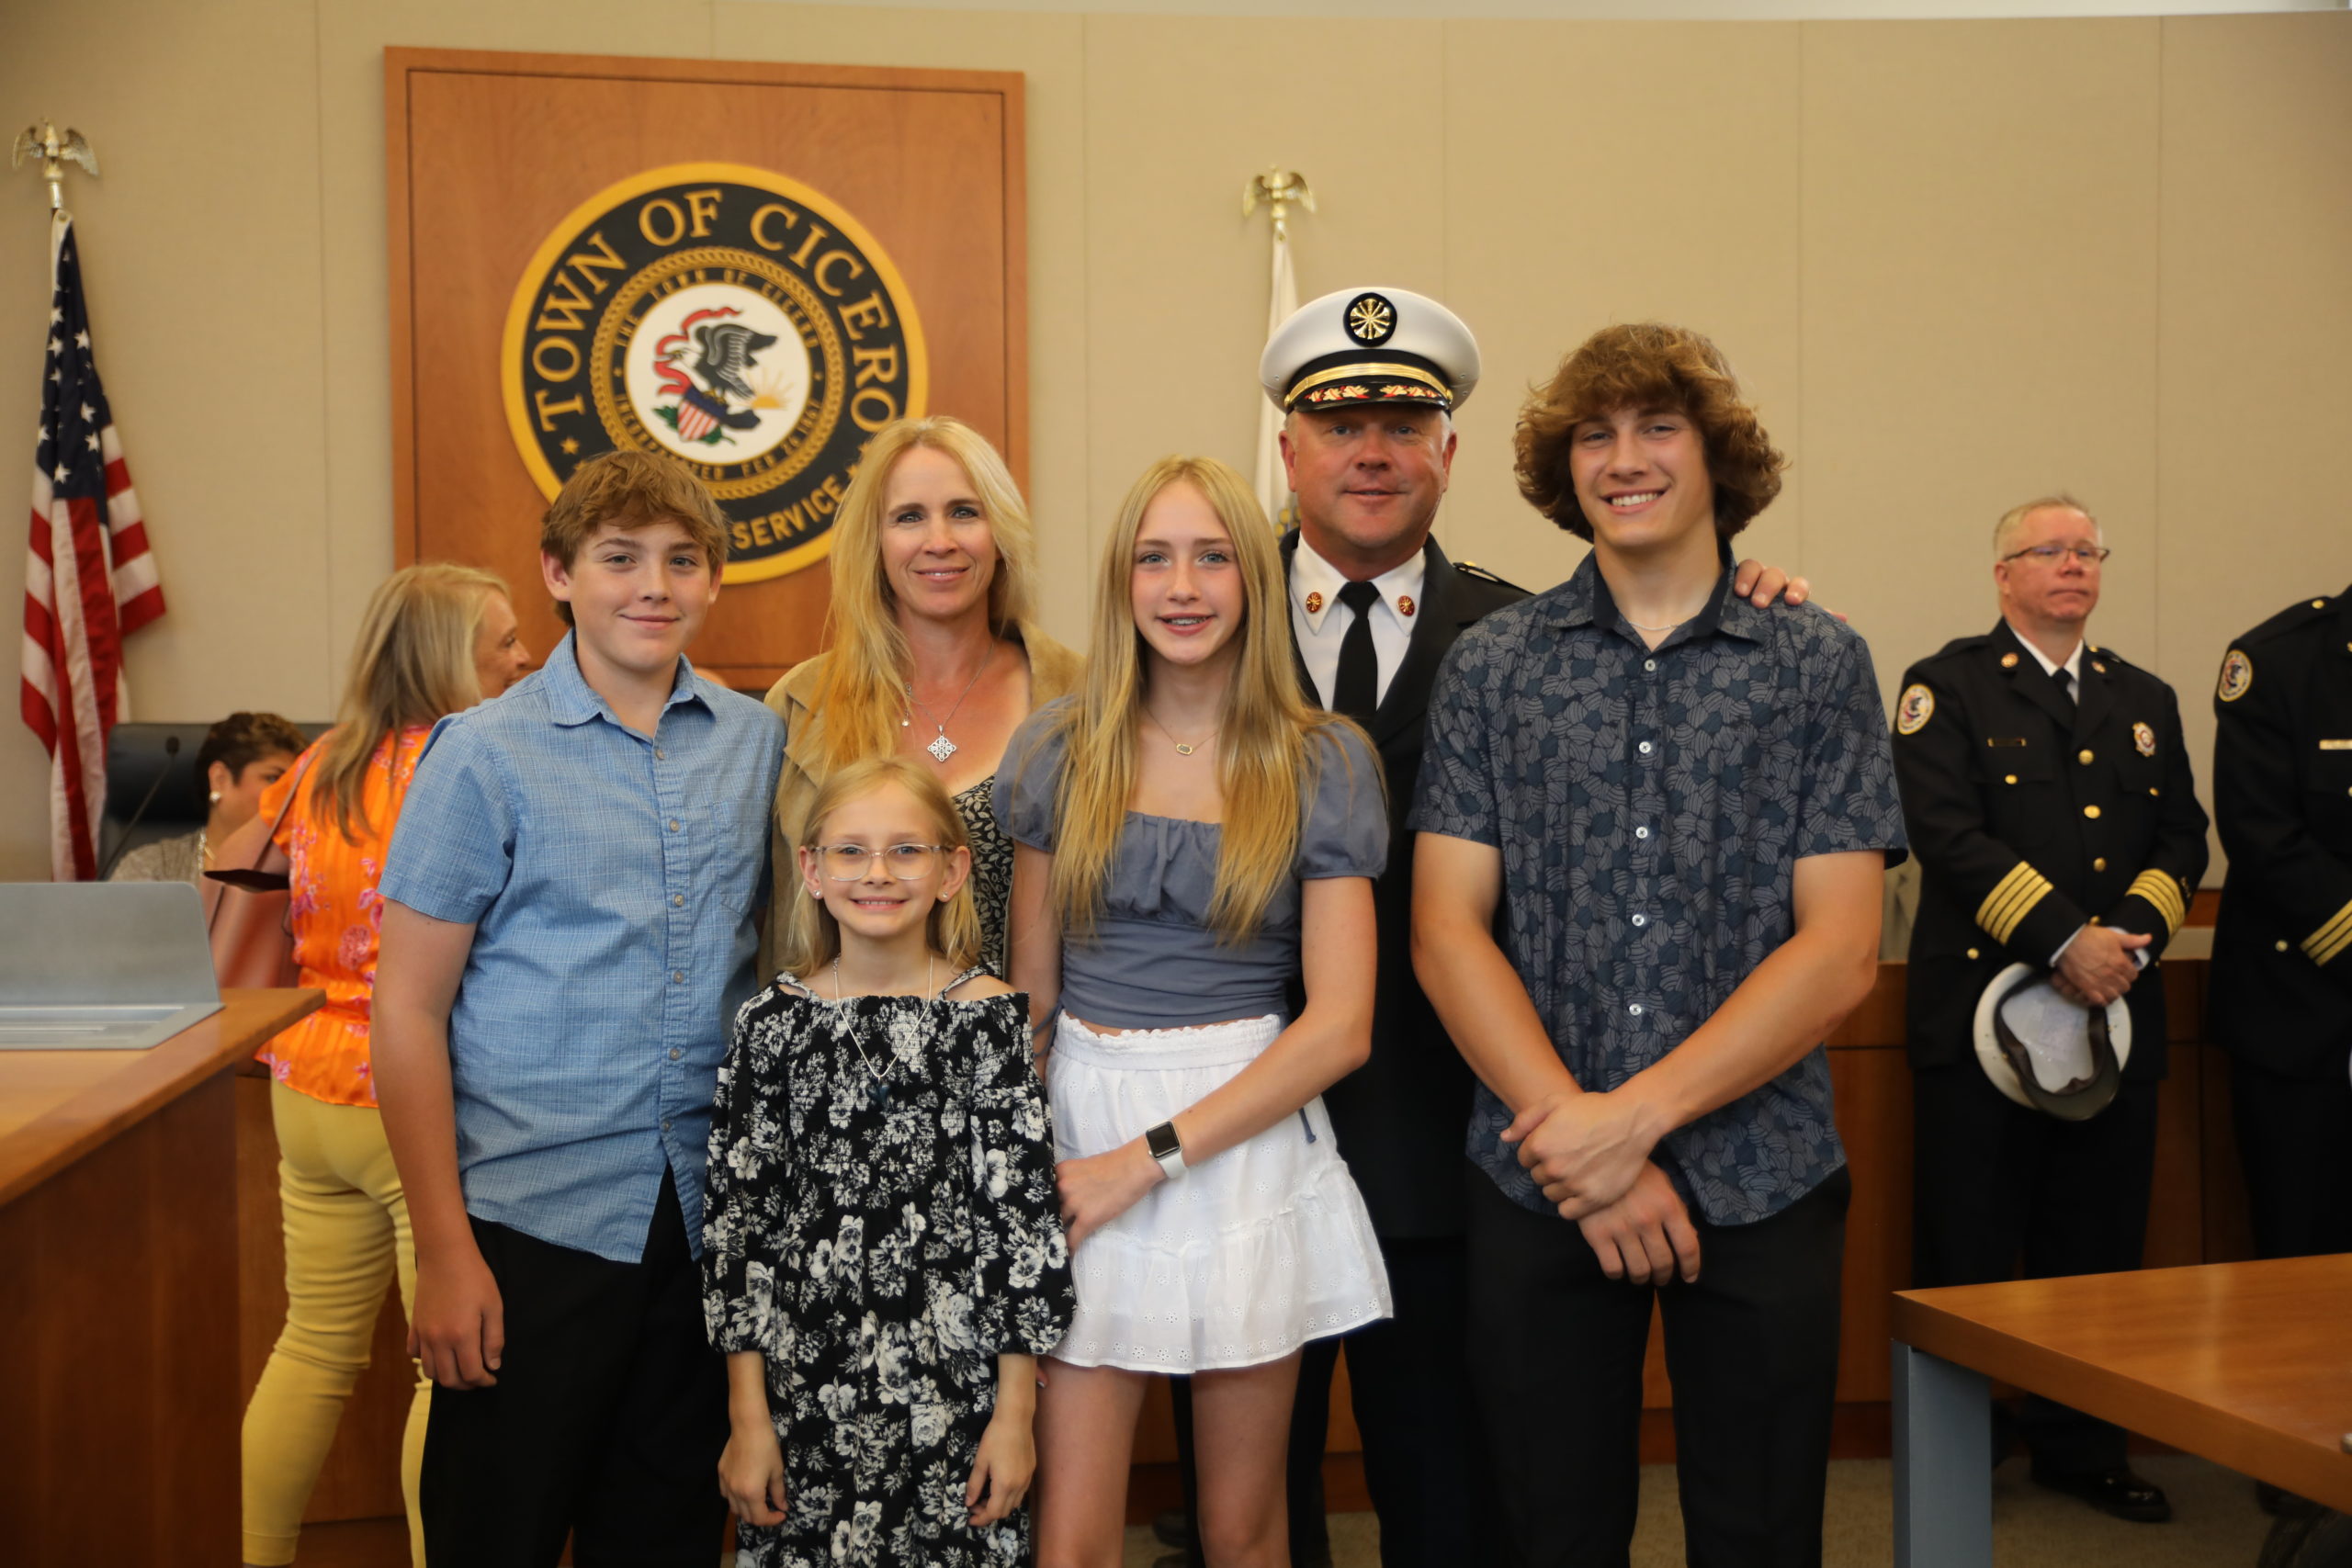 Newly appointed Cicero Fire Chief Jeffrey Penzkofer with his family